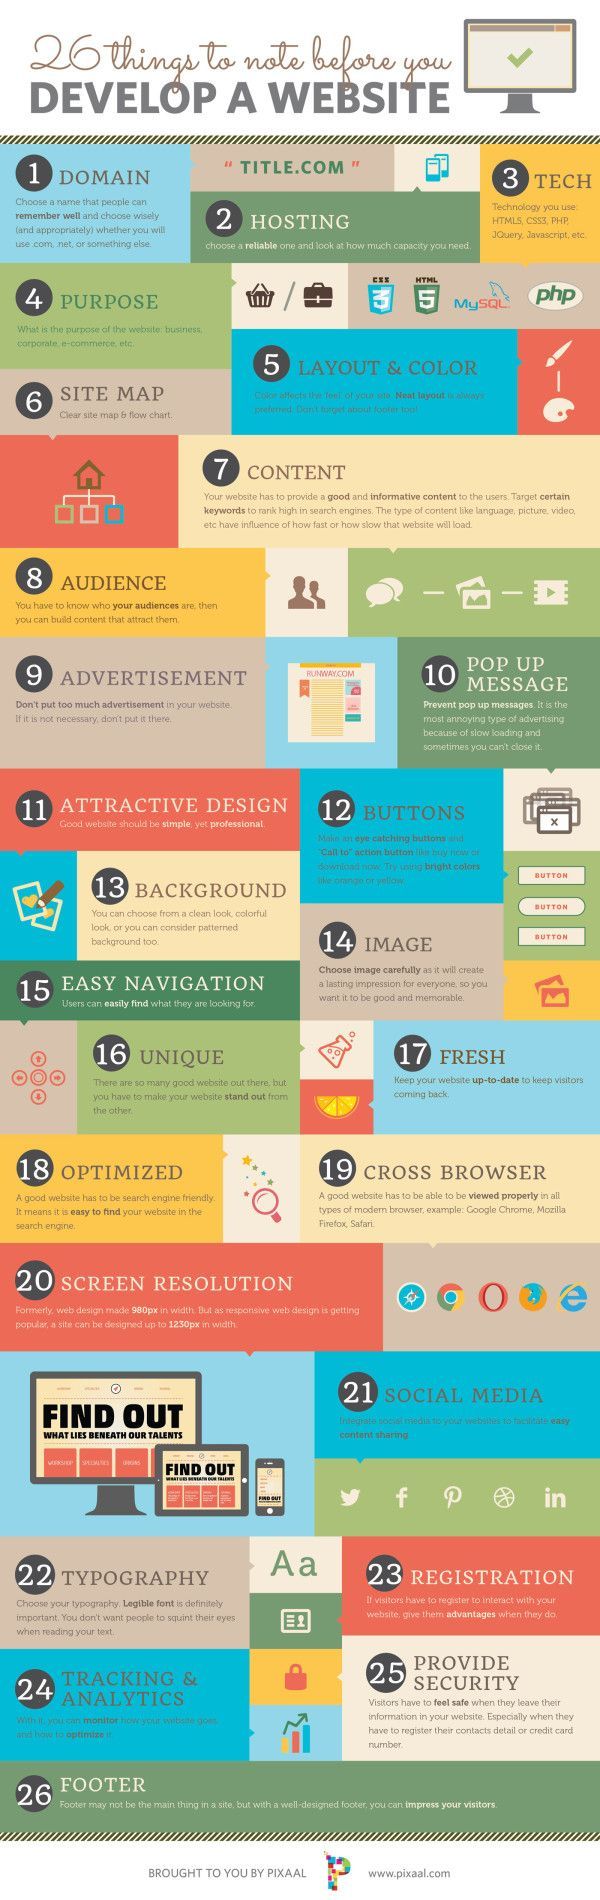 26 Things To Consider Before Developing Your Website